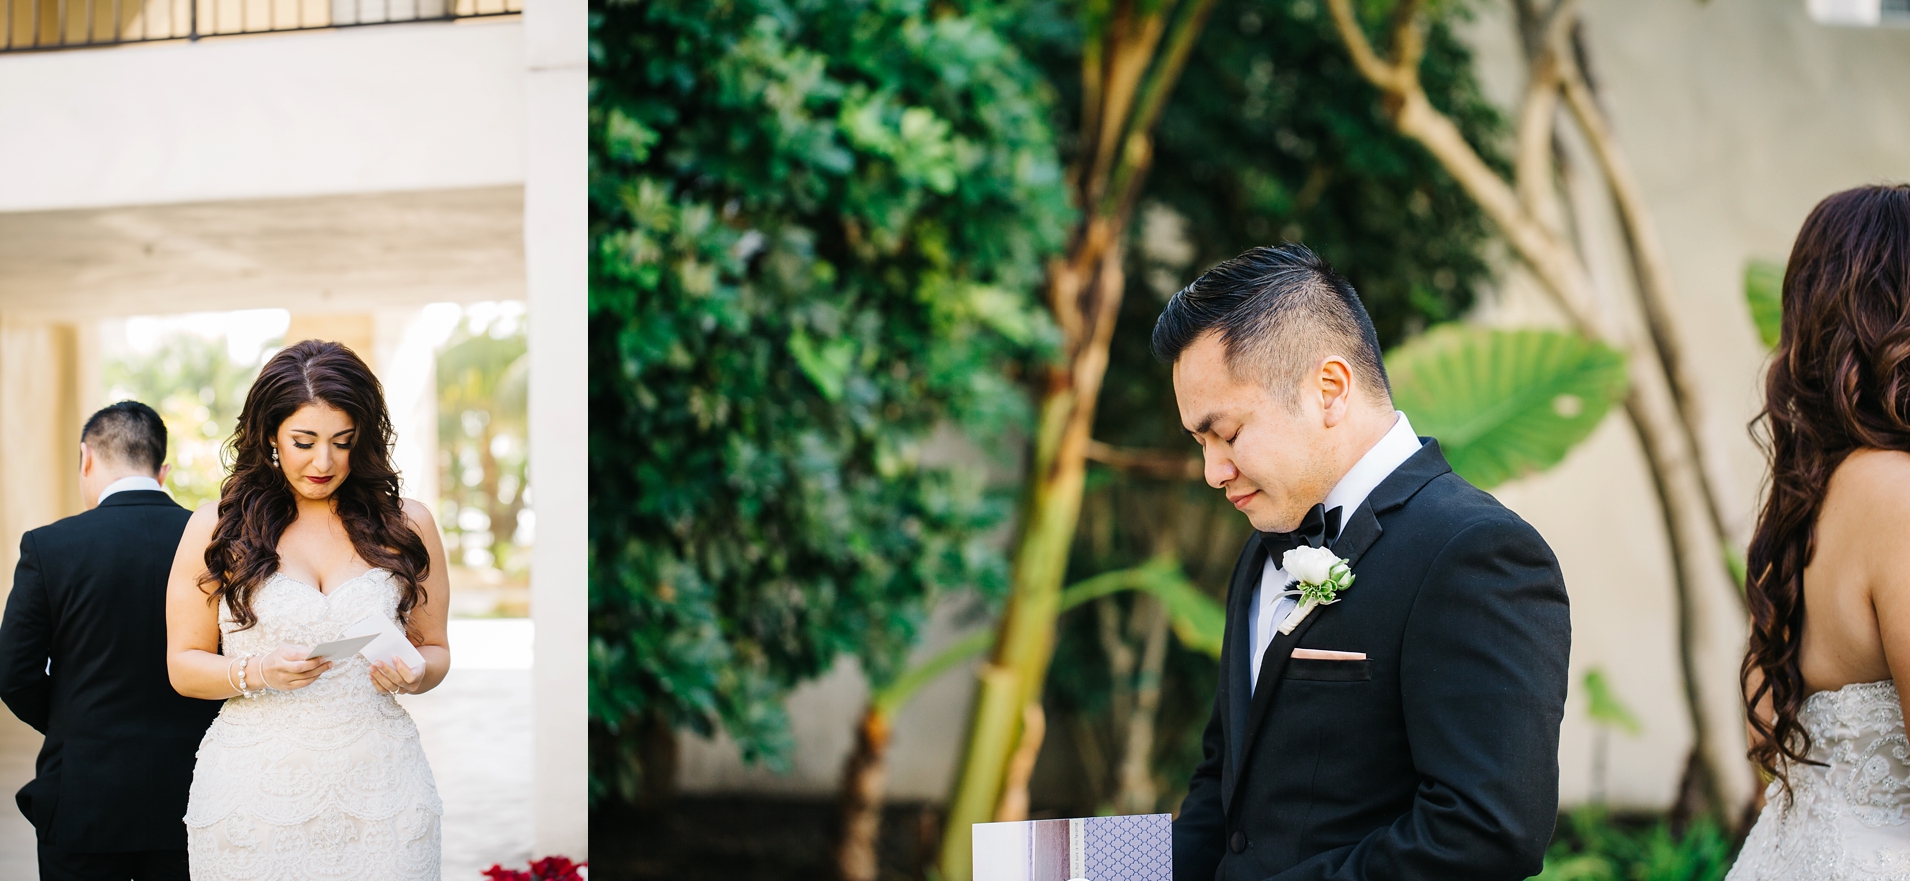 Bride and Groom First Look in Southern California - Brittney Hannon Photography